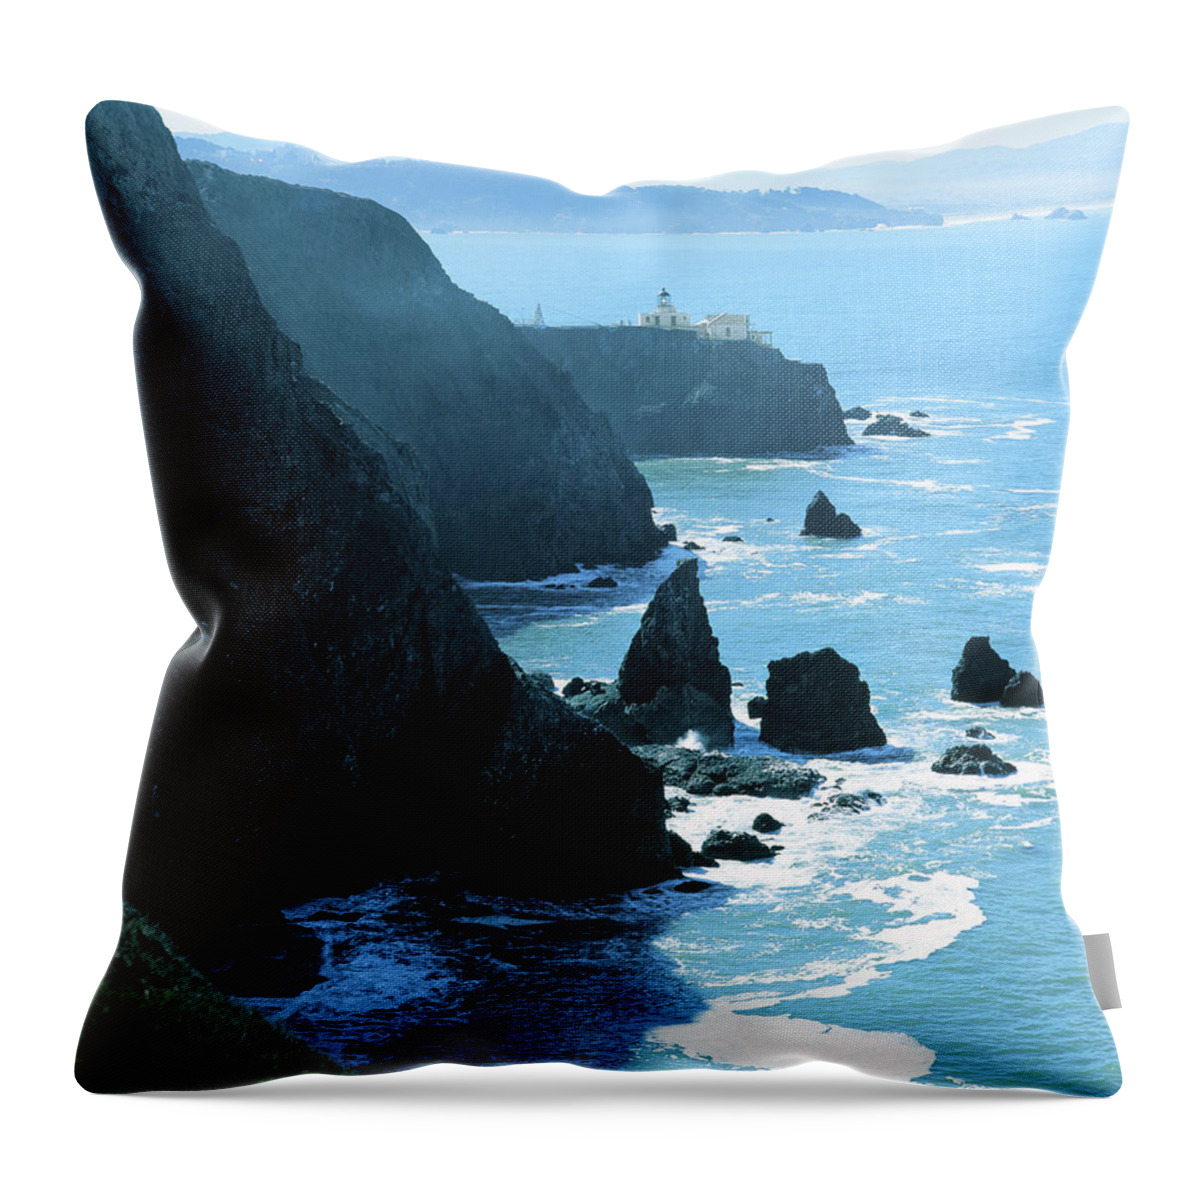 Marin County Throw Pillow featuring the photograph Marin Coastline by Douglas Pulsipher